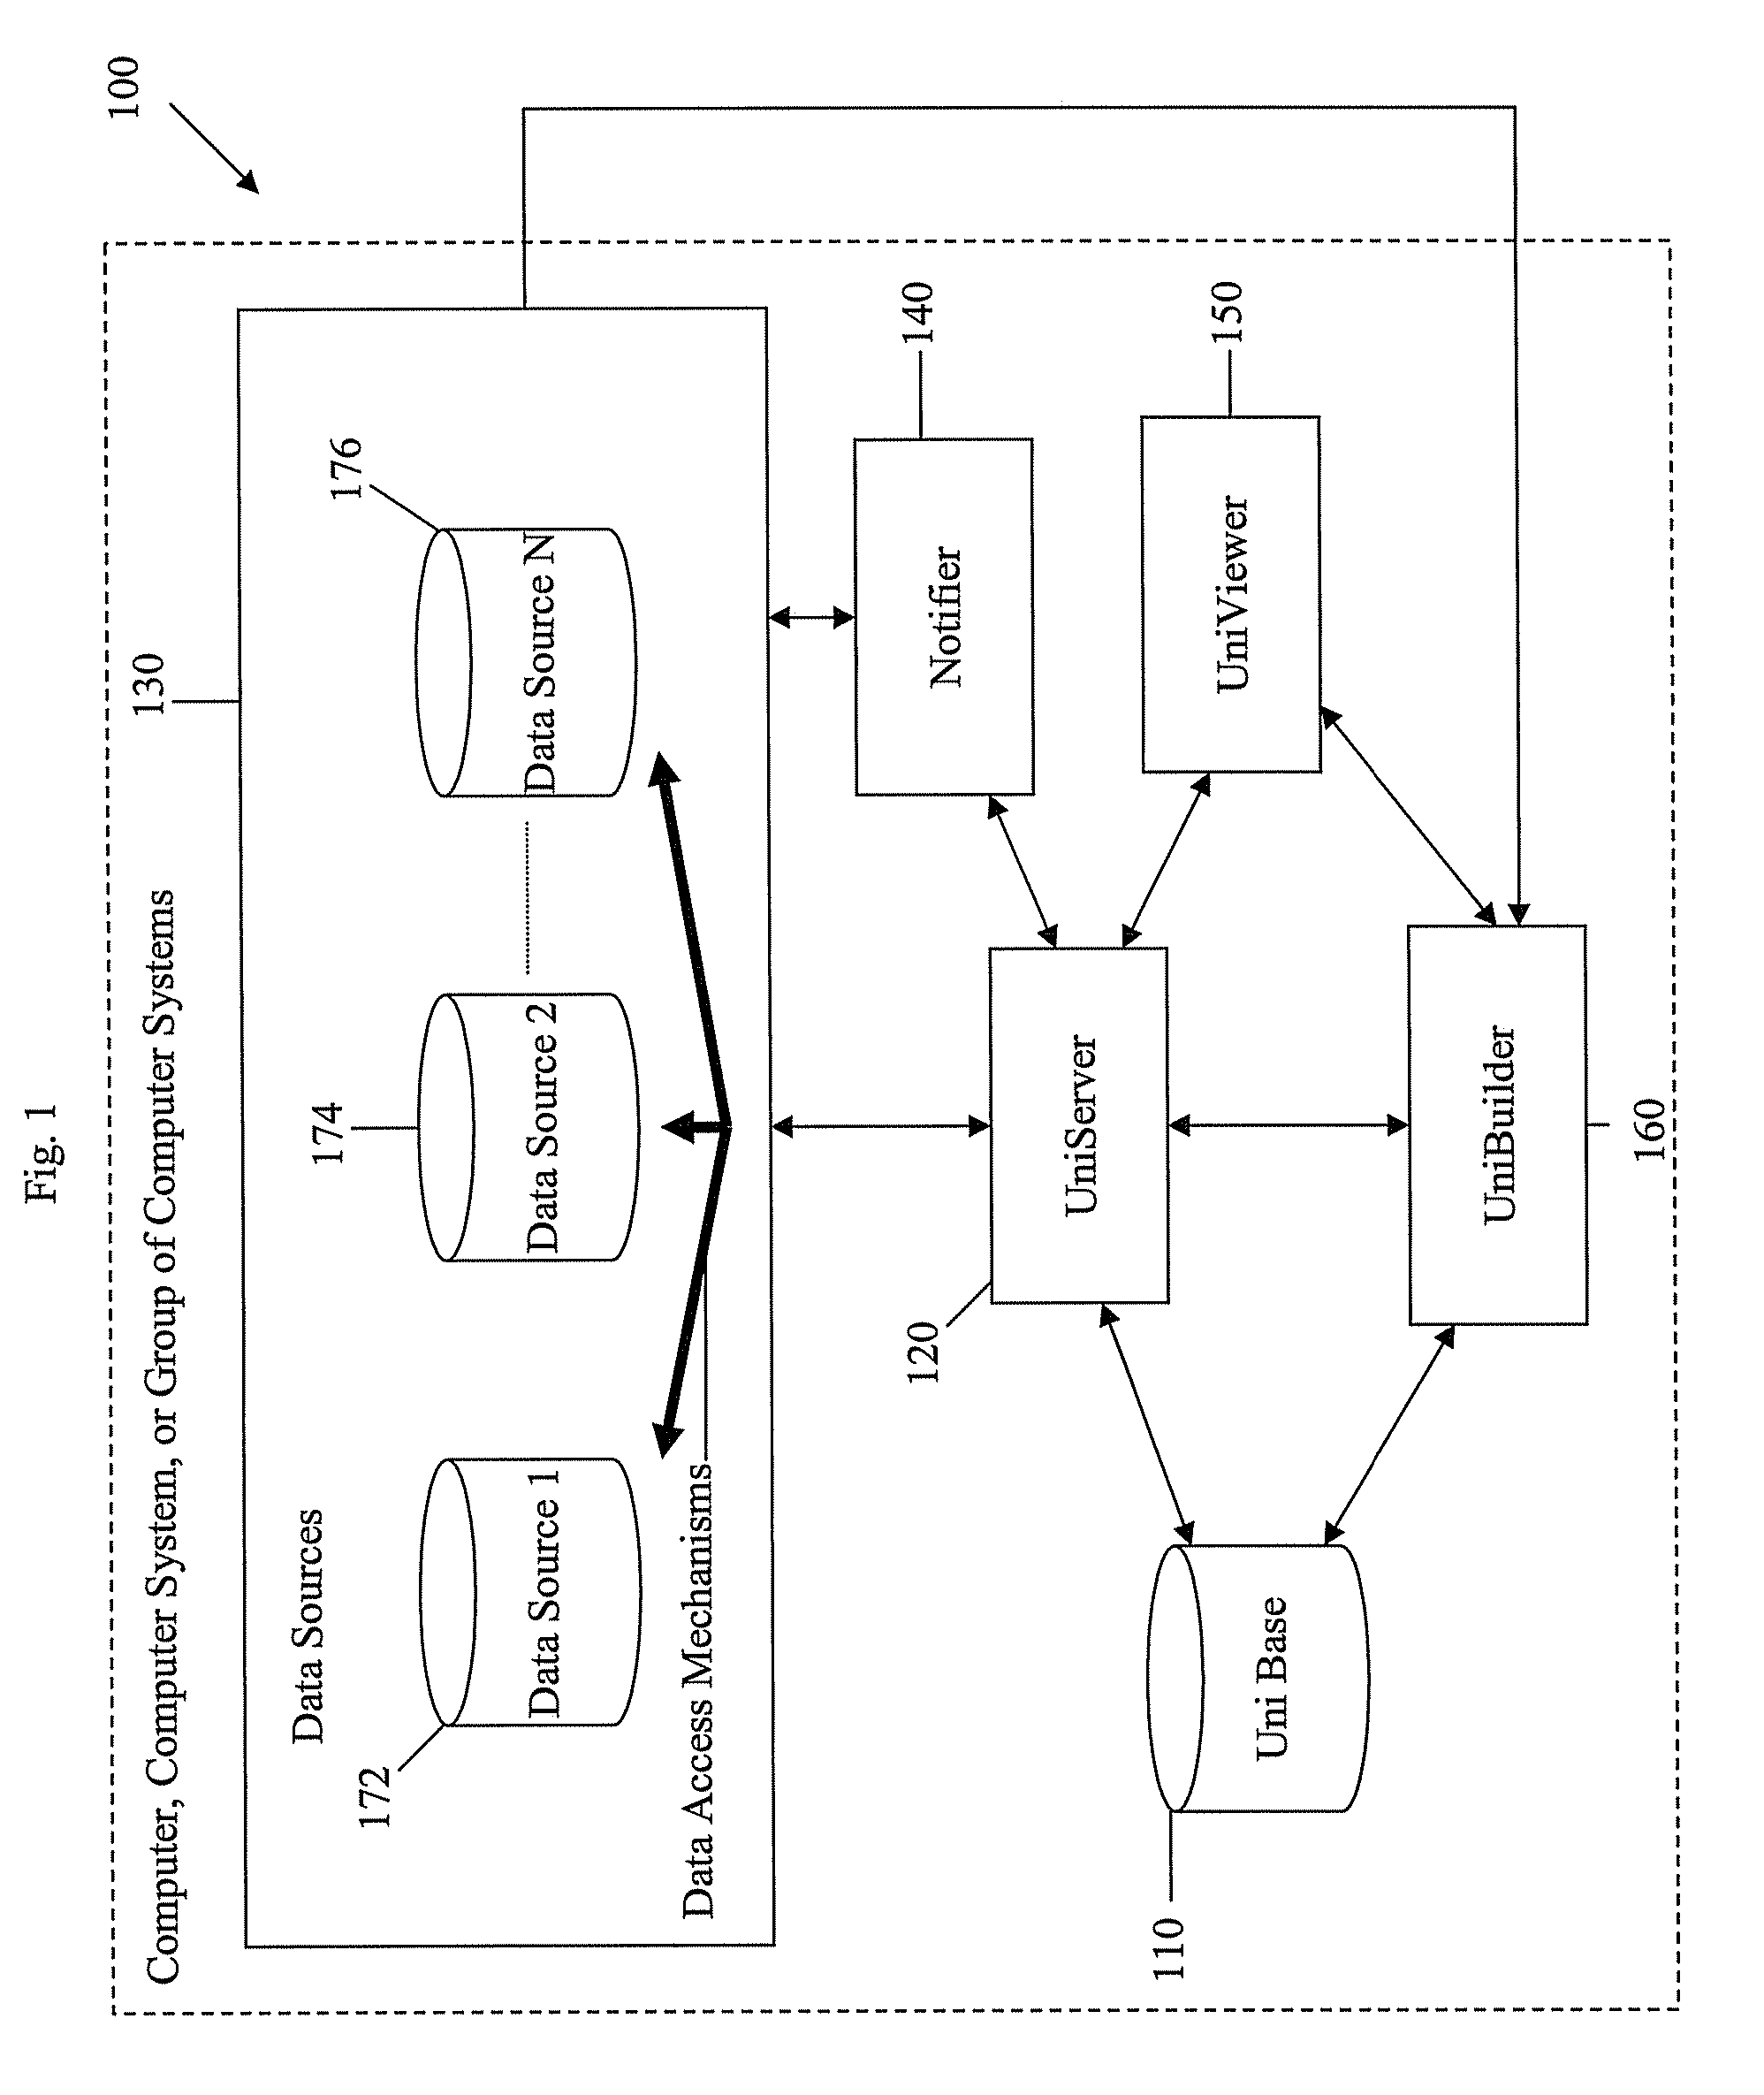 Method and system of unifying data